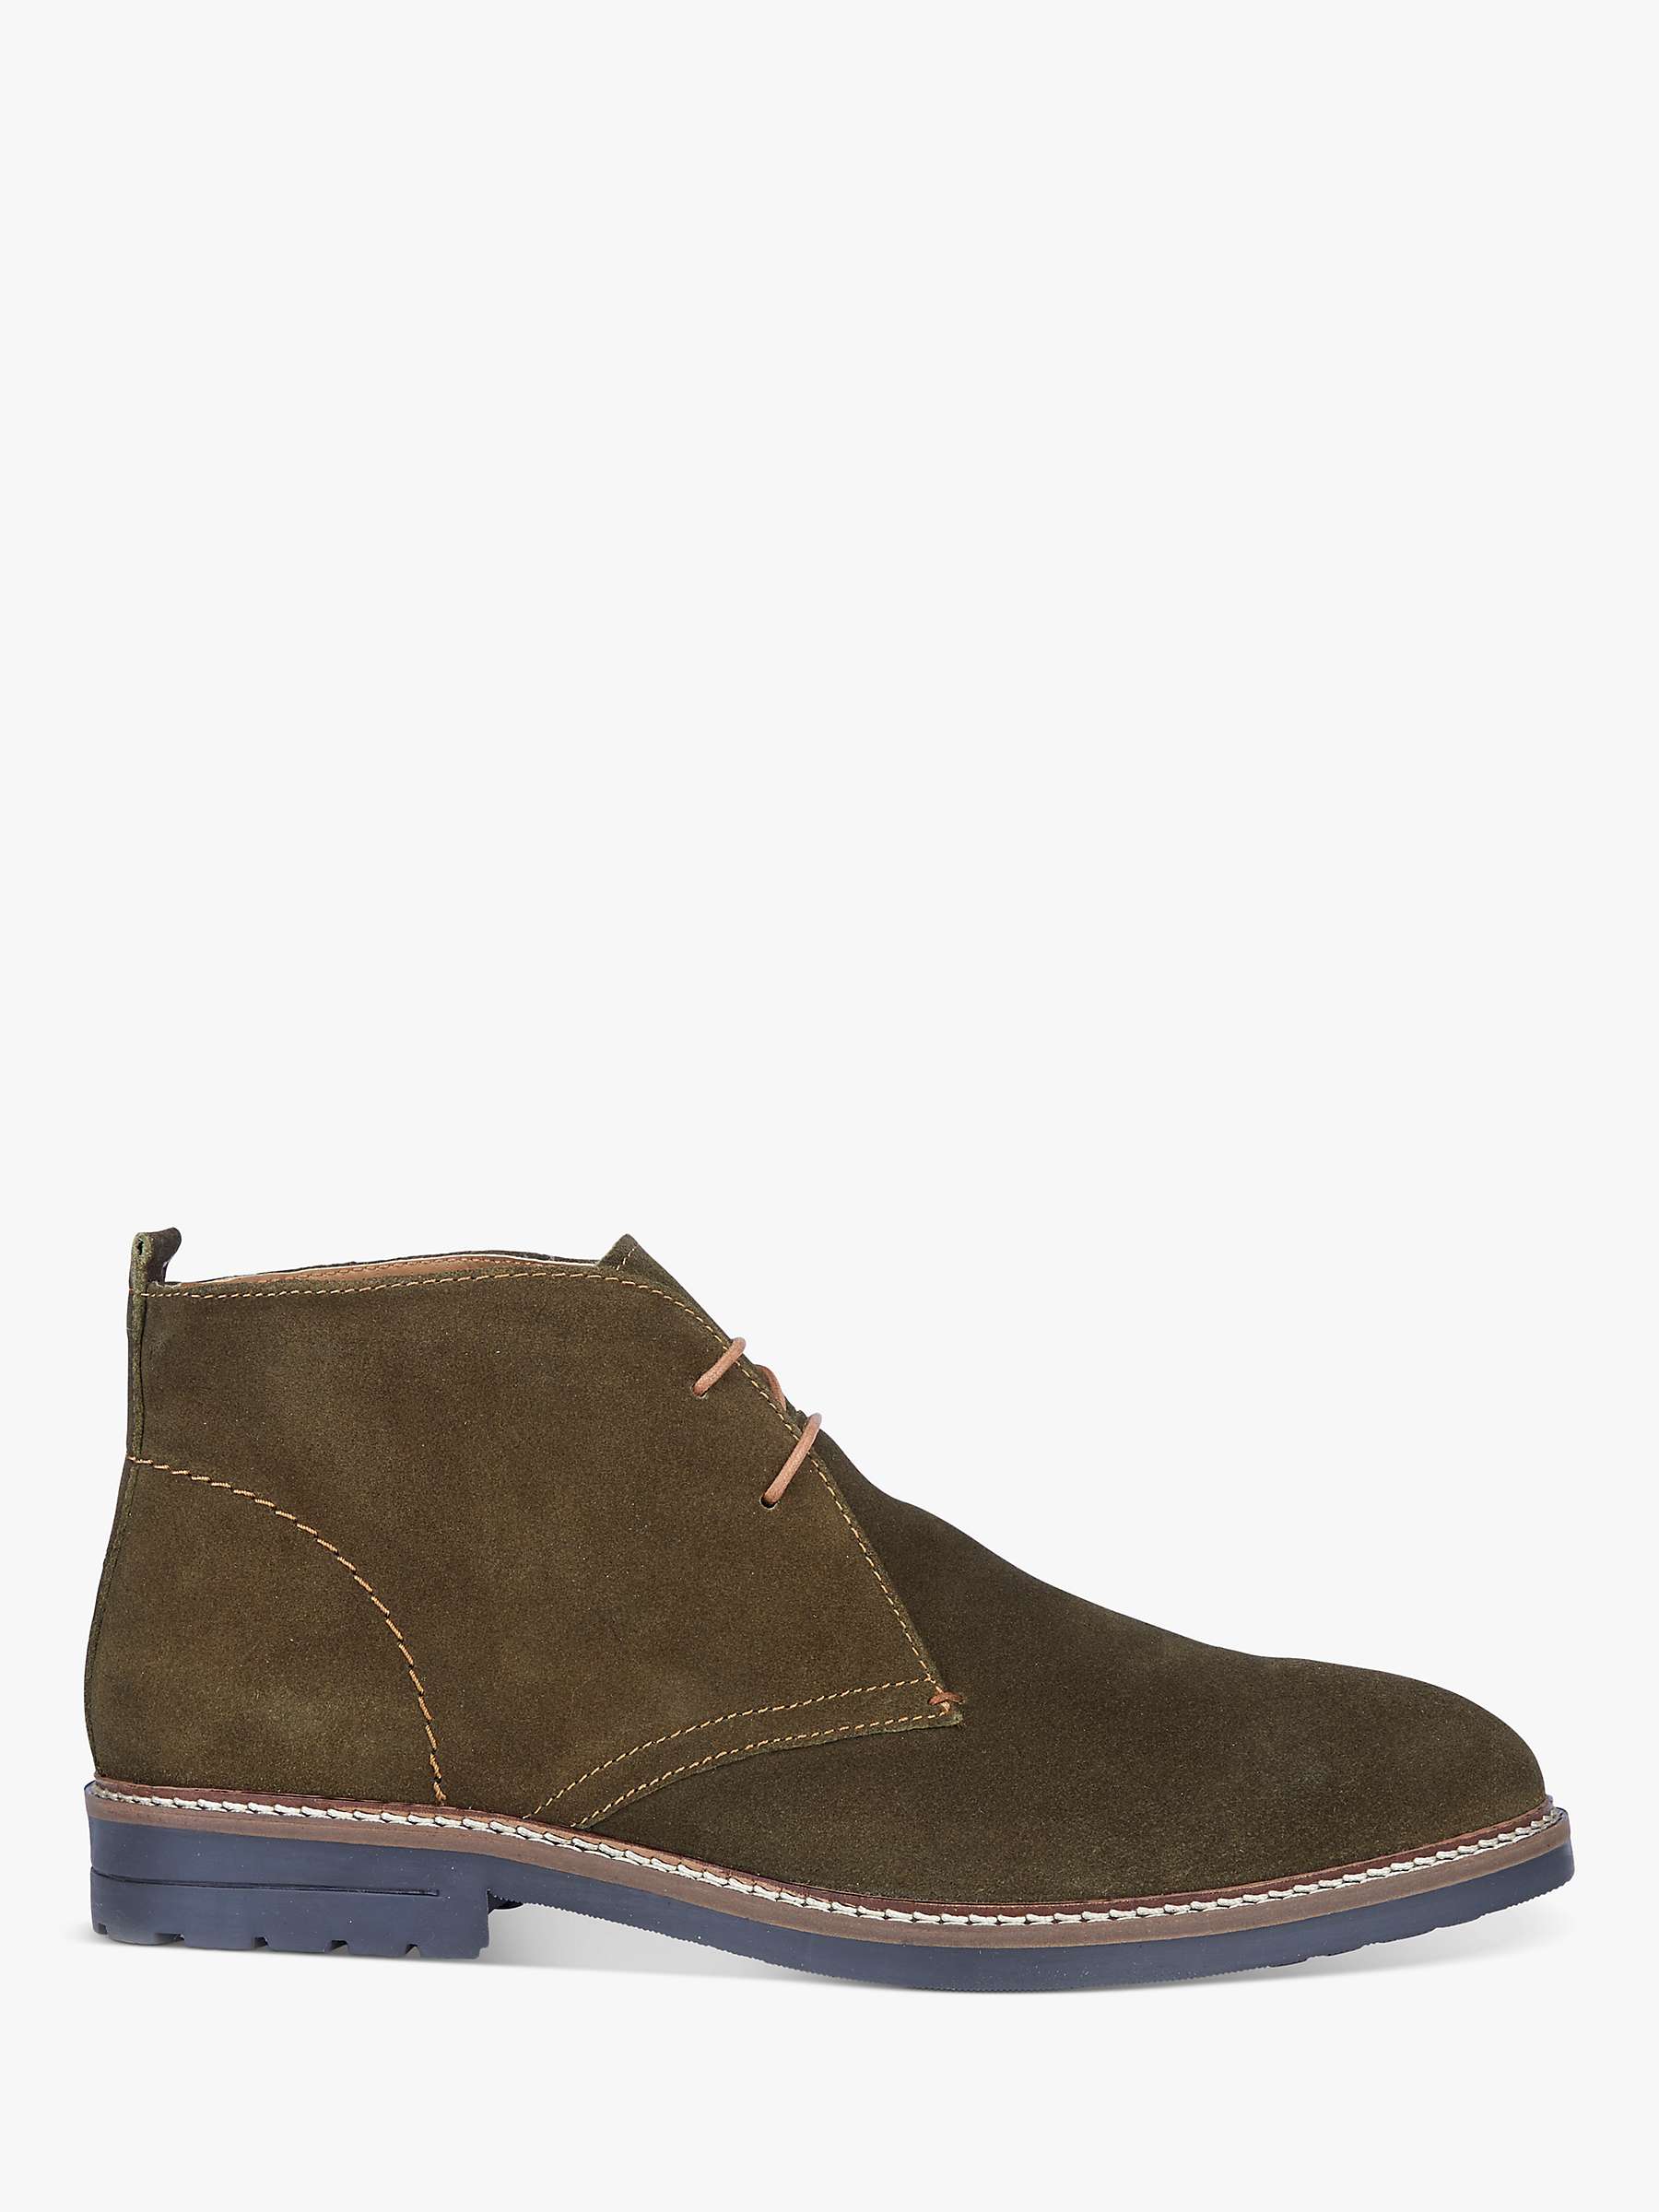 Buy Silver Street London Wicked Suede Chukka Boots Online at johnlewis.com